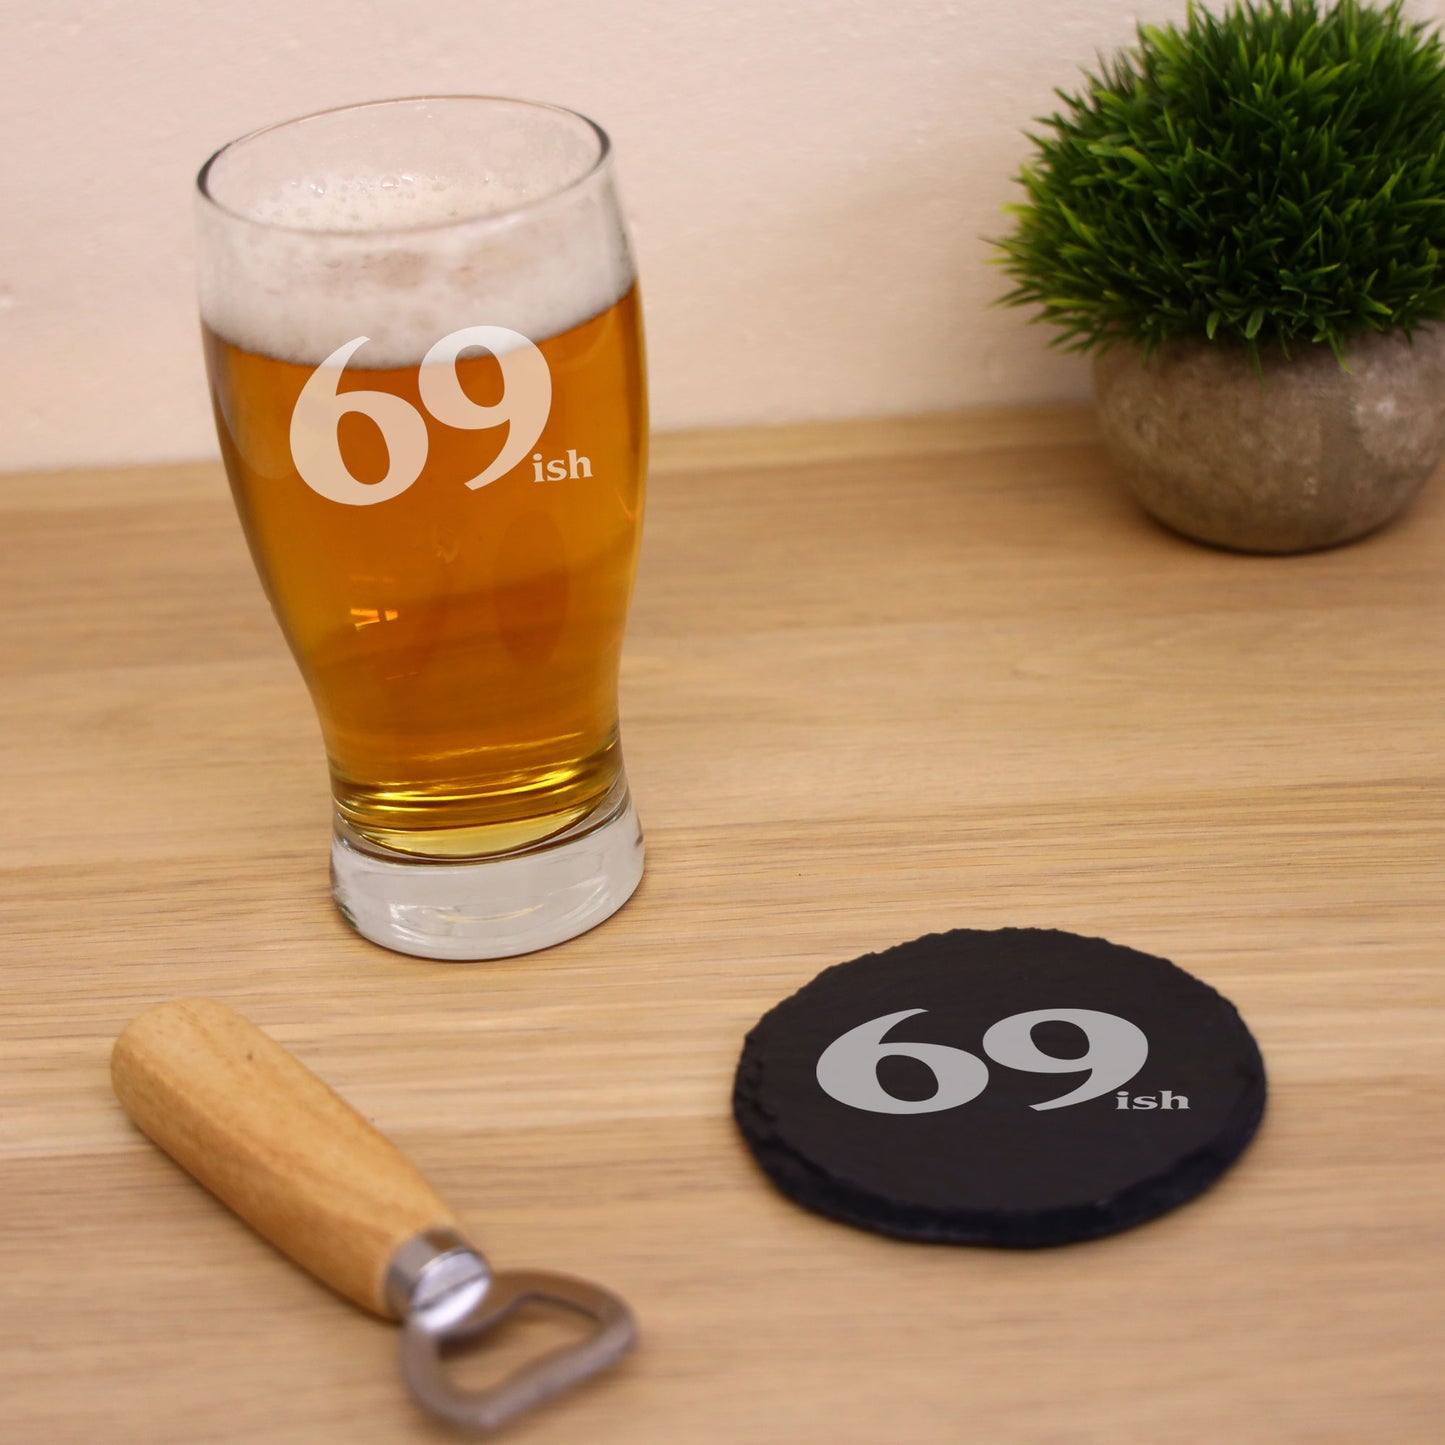 69ish Pint Glass and/or Coaster Set  - Always Looking Good - Glass & Round Coaster Set  